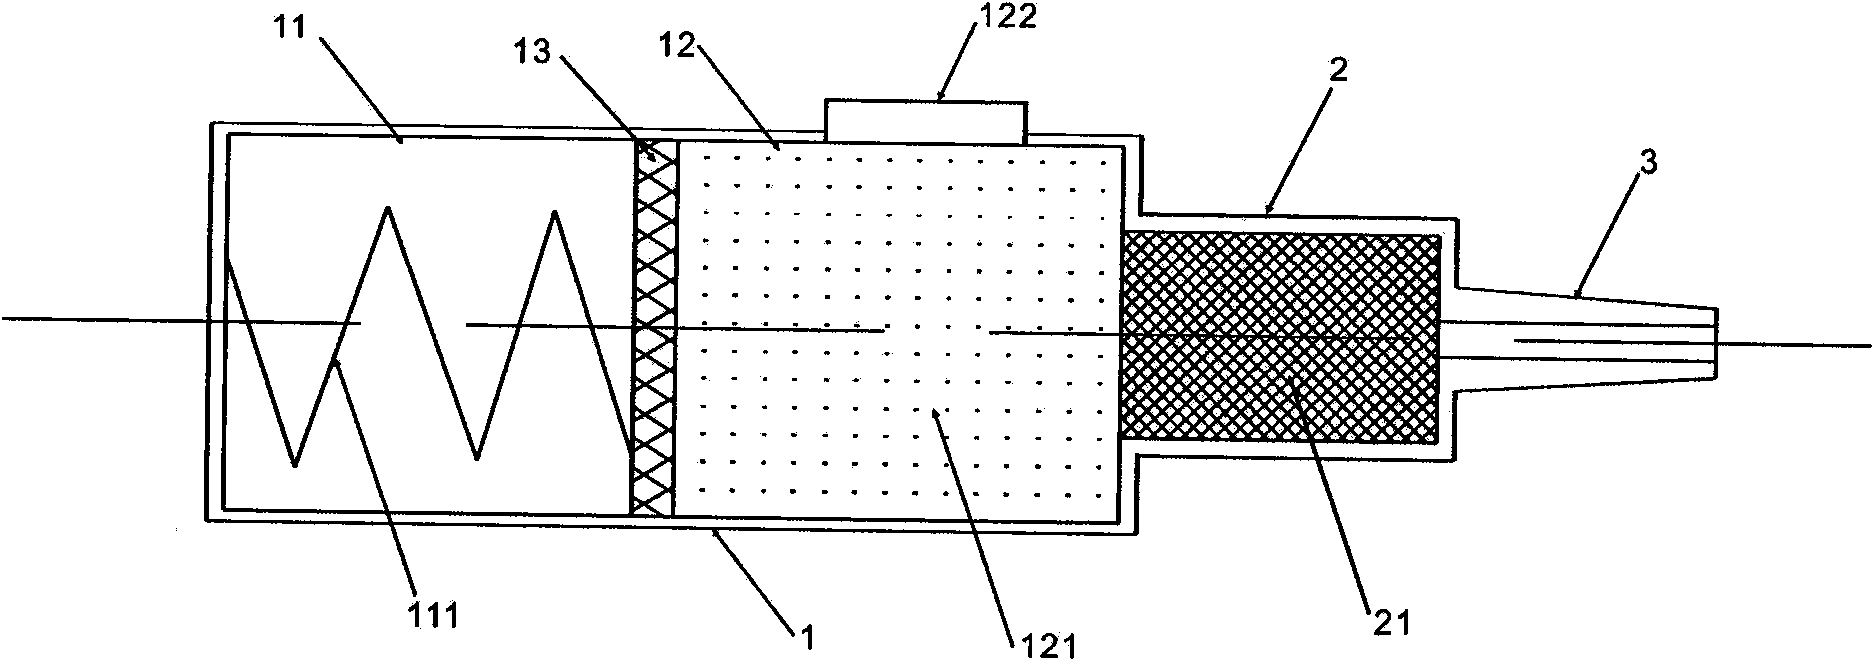 Thrombus prevention device with indwelling catheter